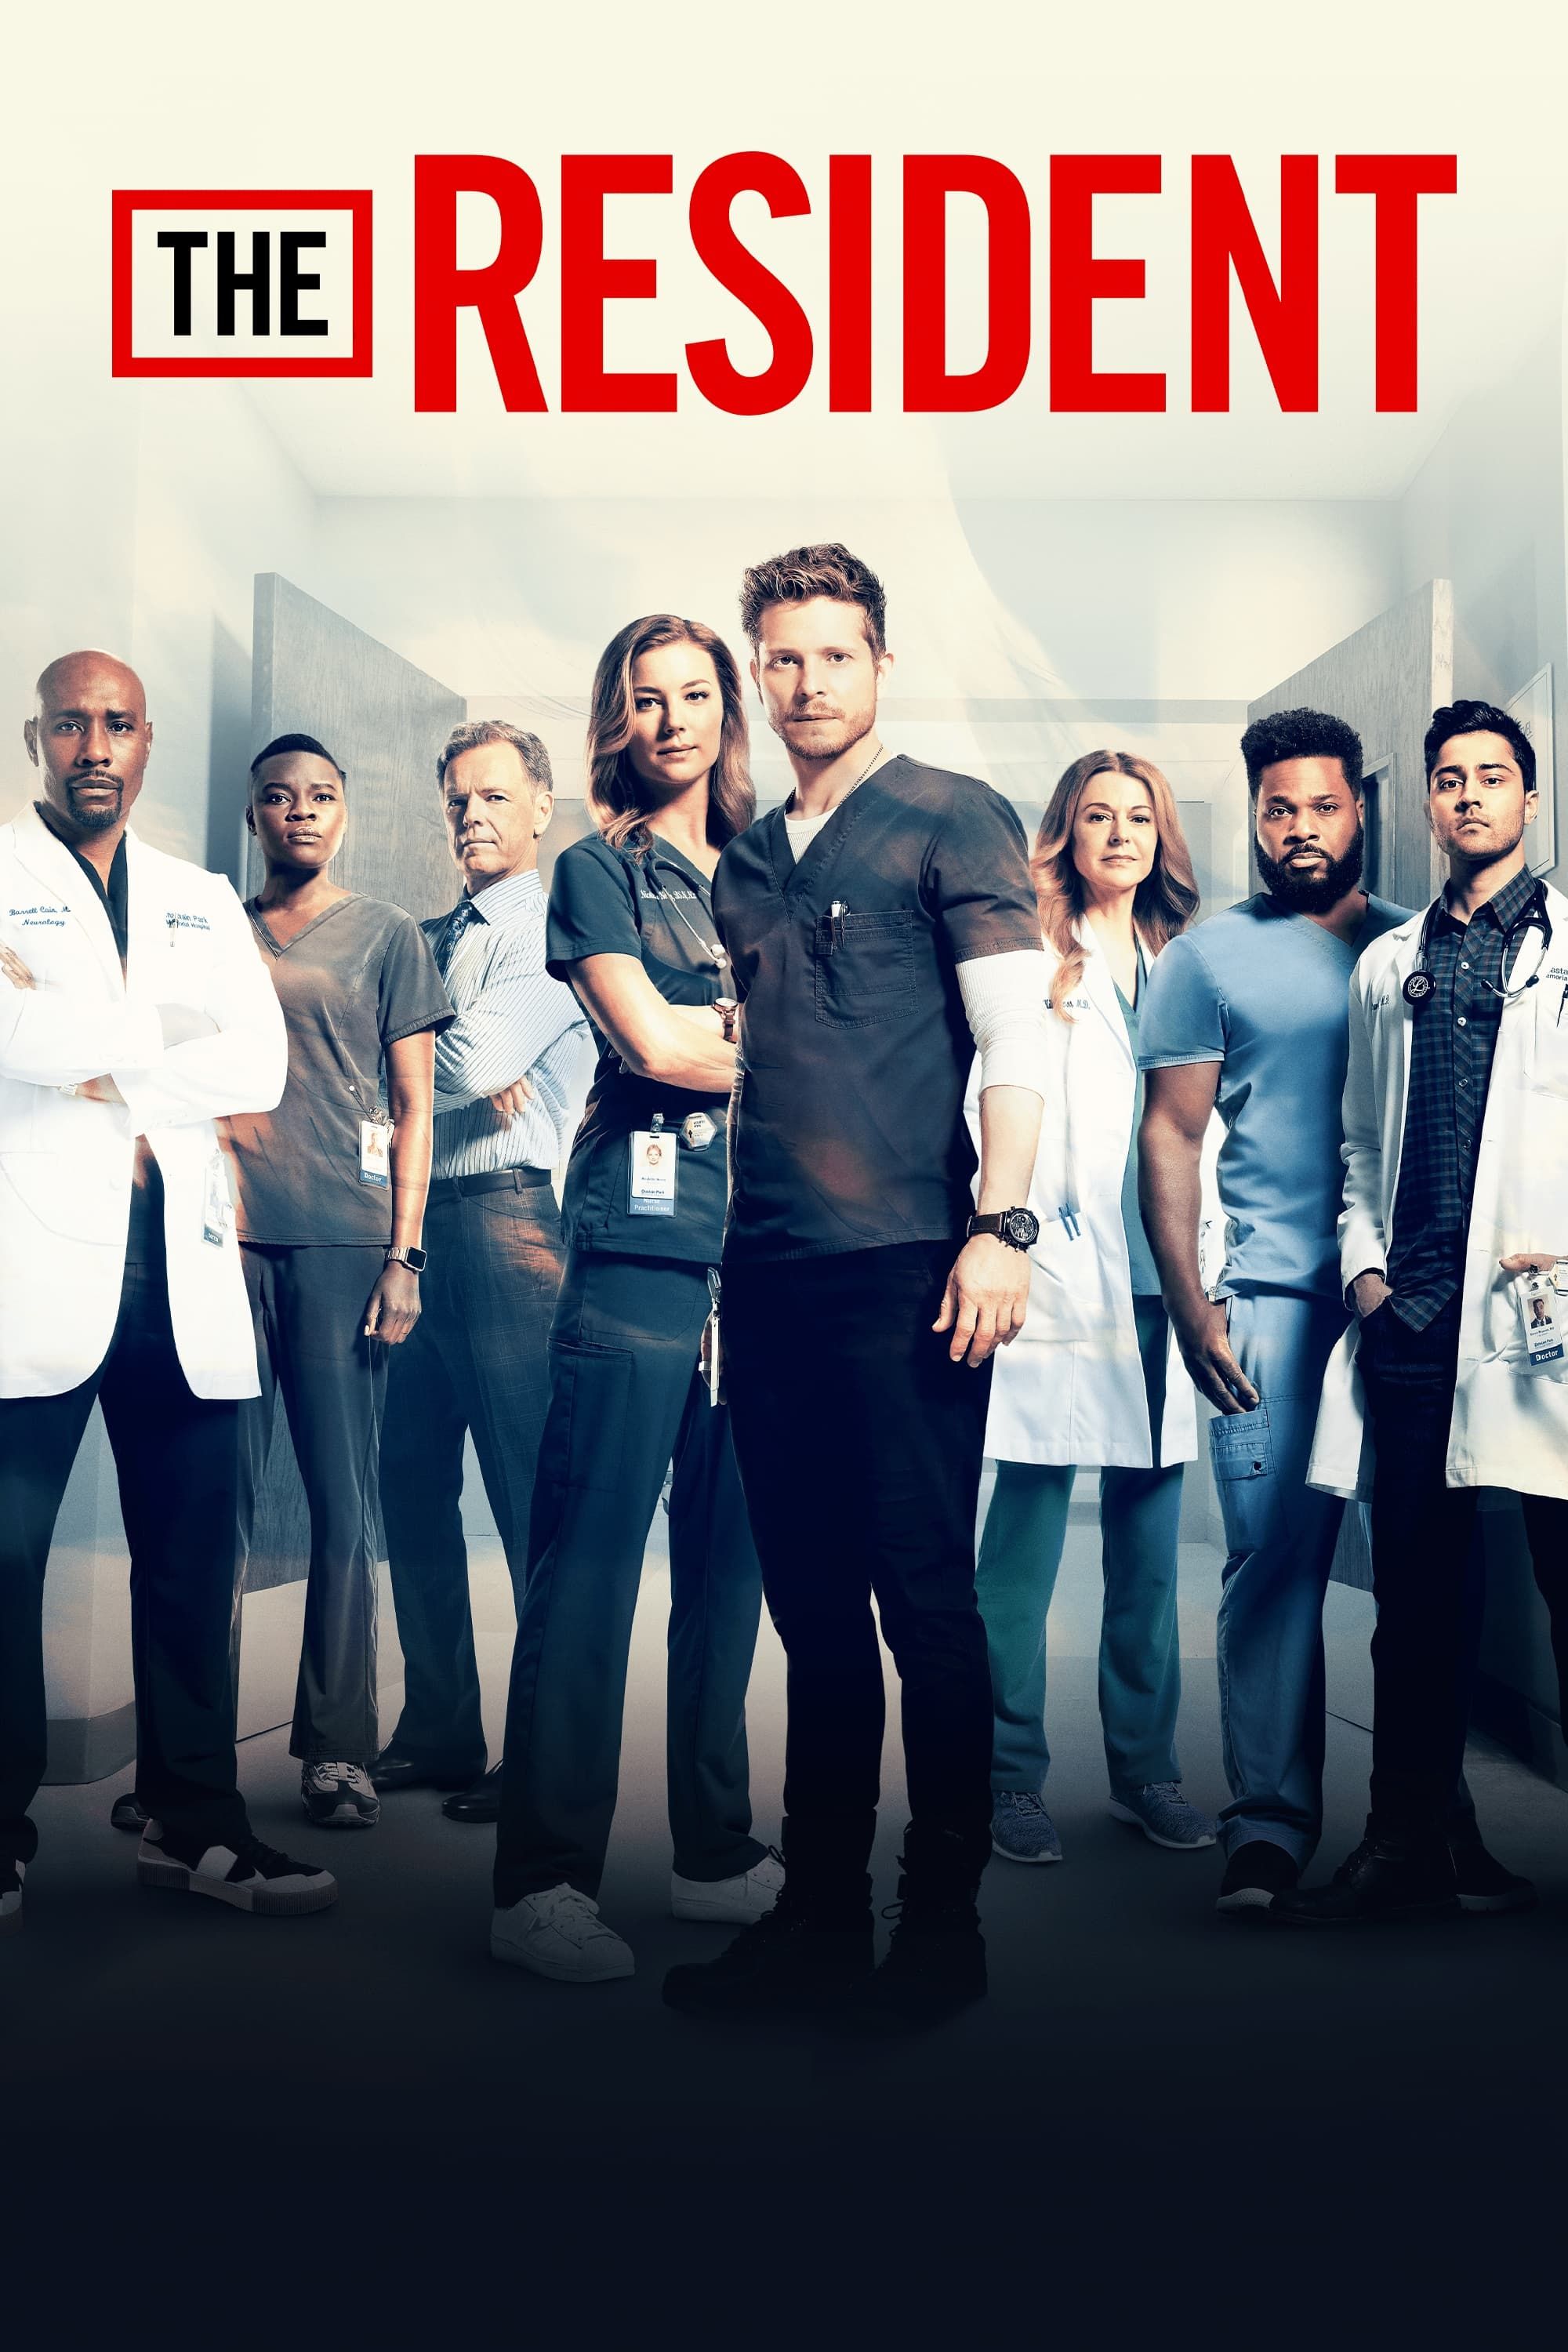 A group of medical doctirs standing together including Matt Czuchry and Emily VanCamp in the poster for The Resident